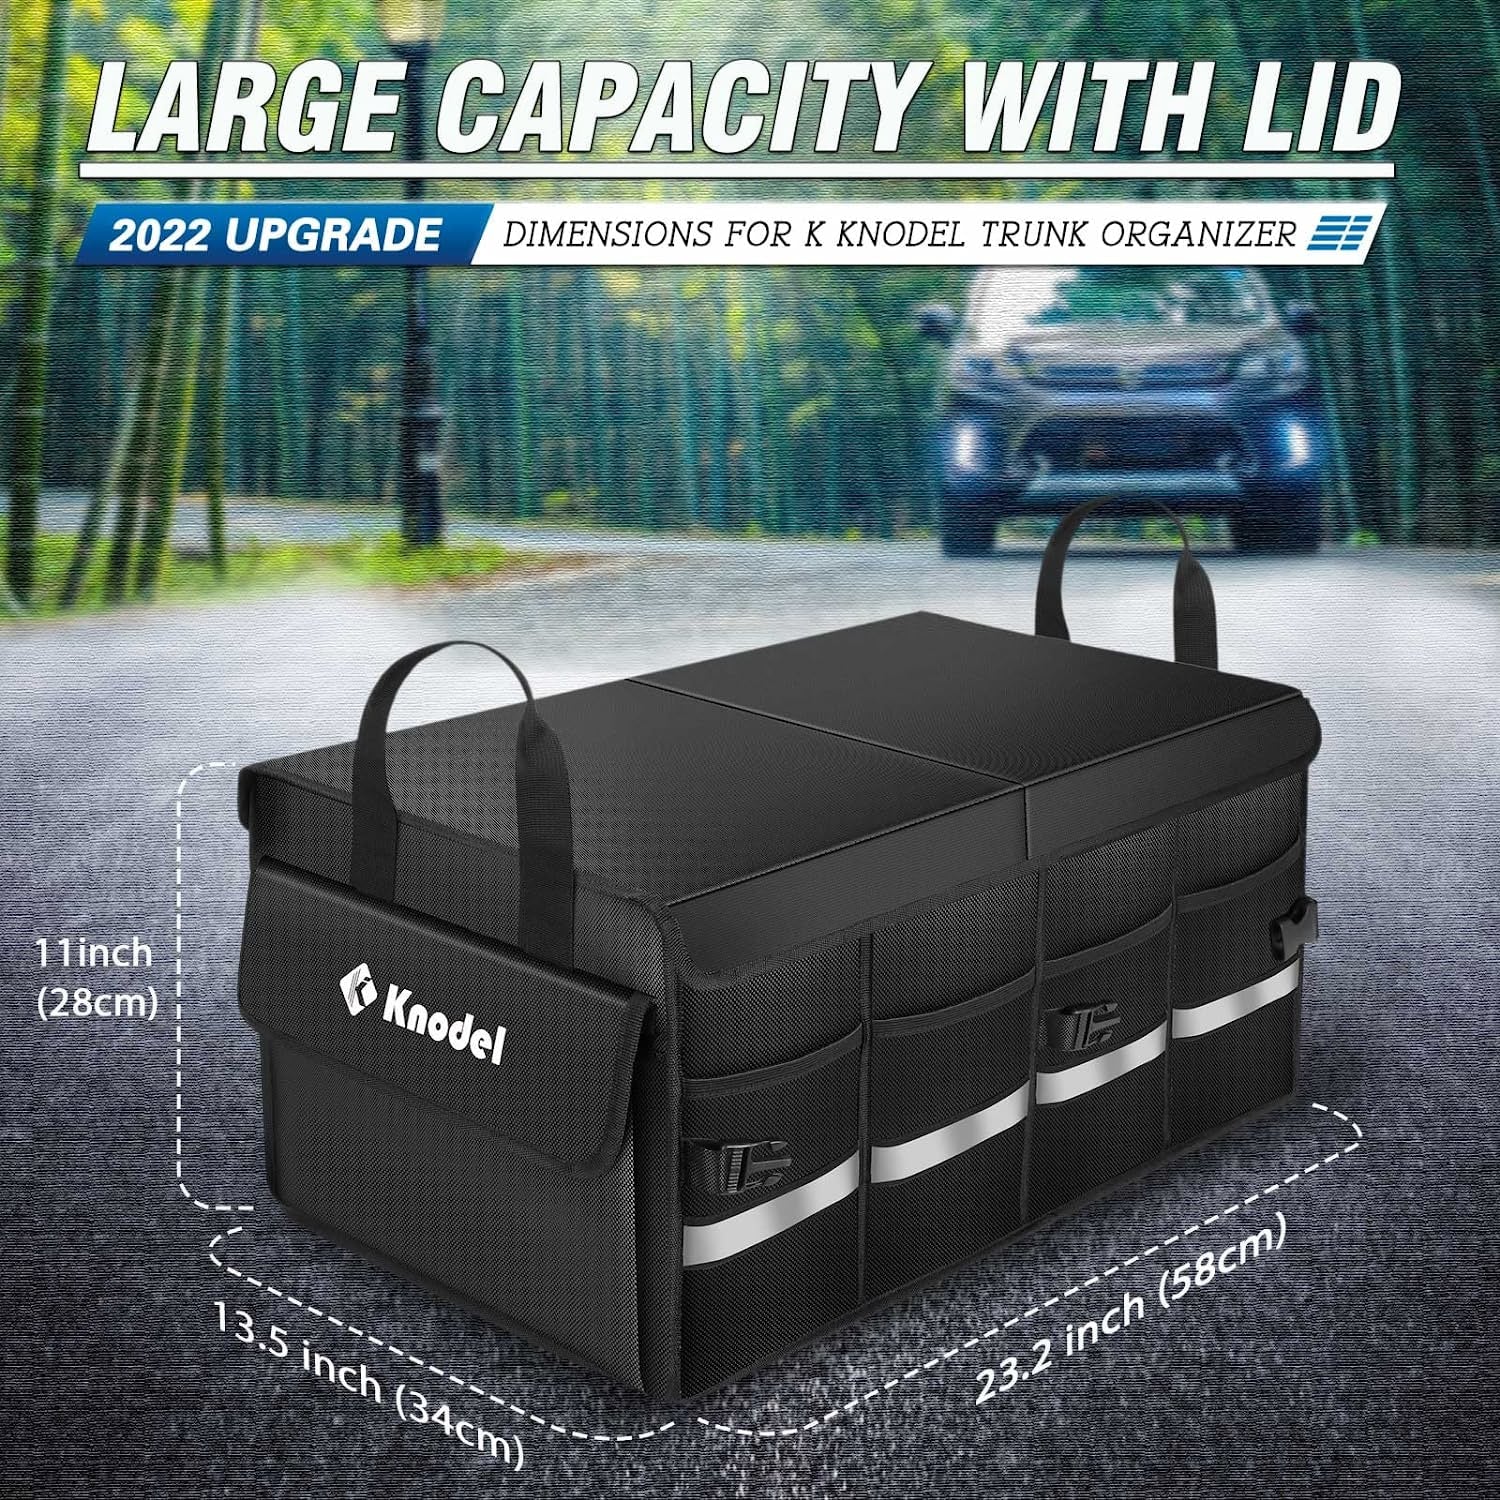 XL Car Trunk Organizer with Lid, Collapsible Car Trunk Storage Organizer, Car Organizer and Storage for SUV, Truck, Sedan (Black)